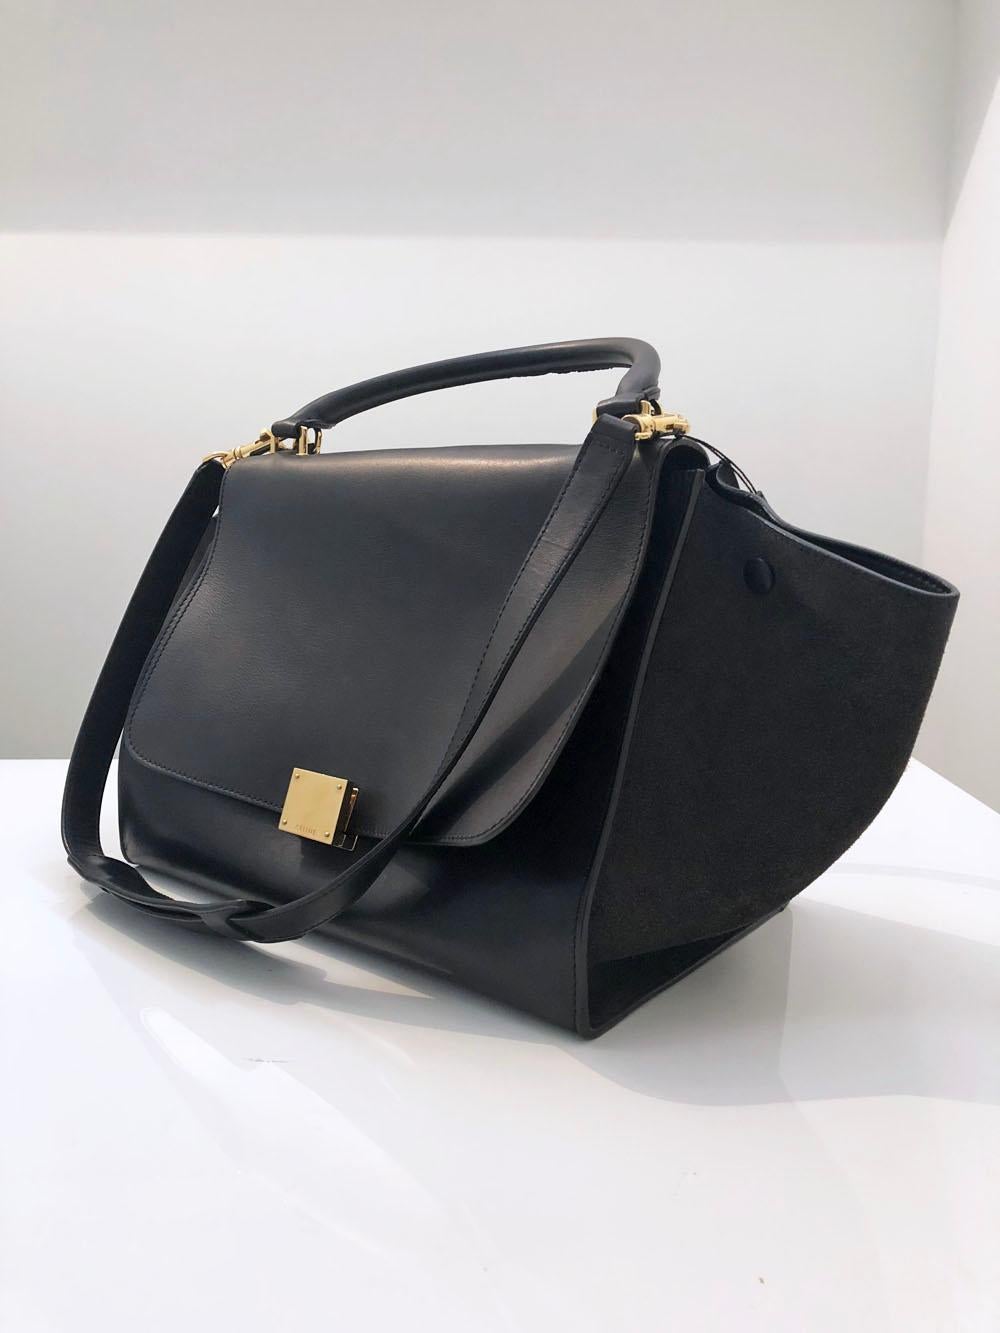 The Celine Trapeze bag will never go out of style. An essential for carrying all your everyday necessities with a removable, adjustable cross body strap and top handle with gold hardware. One zip pocket on the back. The tip flap opens to reveal a